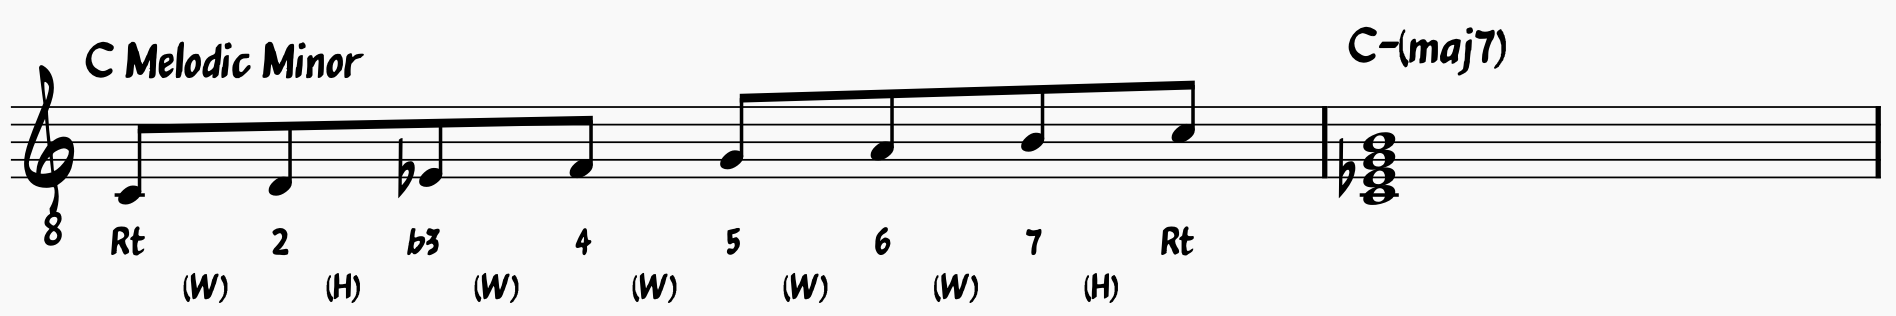 C Melodic Minor Scale (Parent Scale) and associated 7th chord